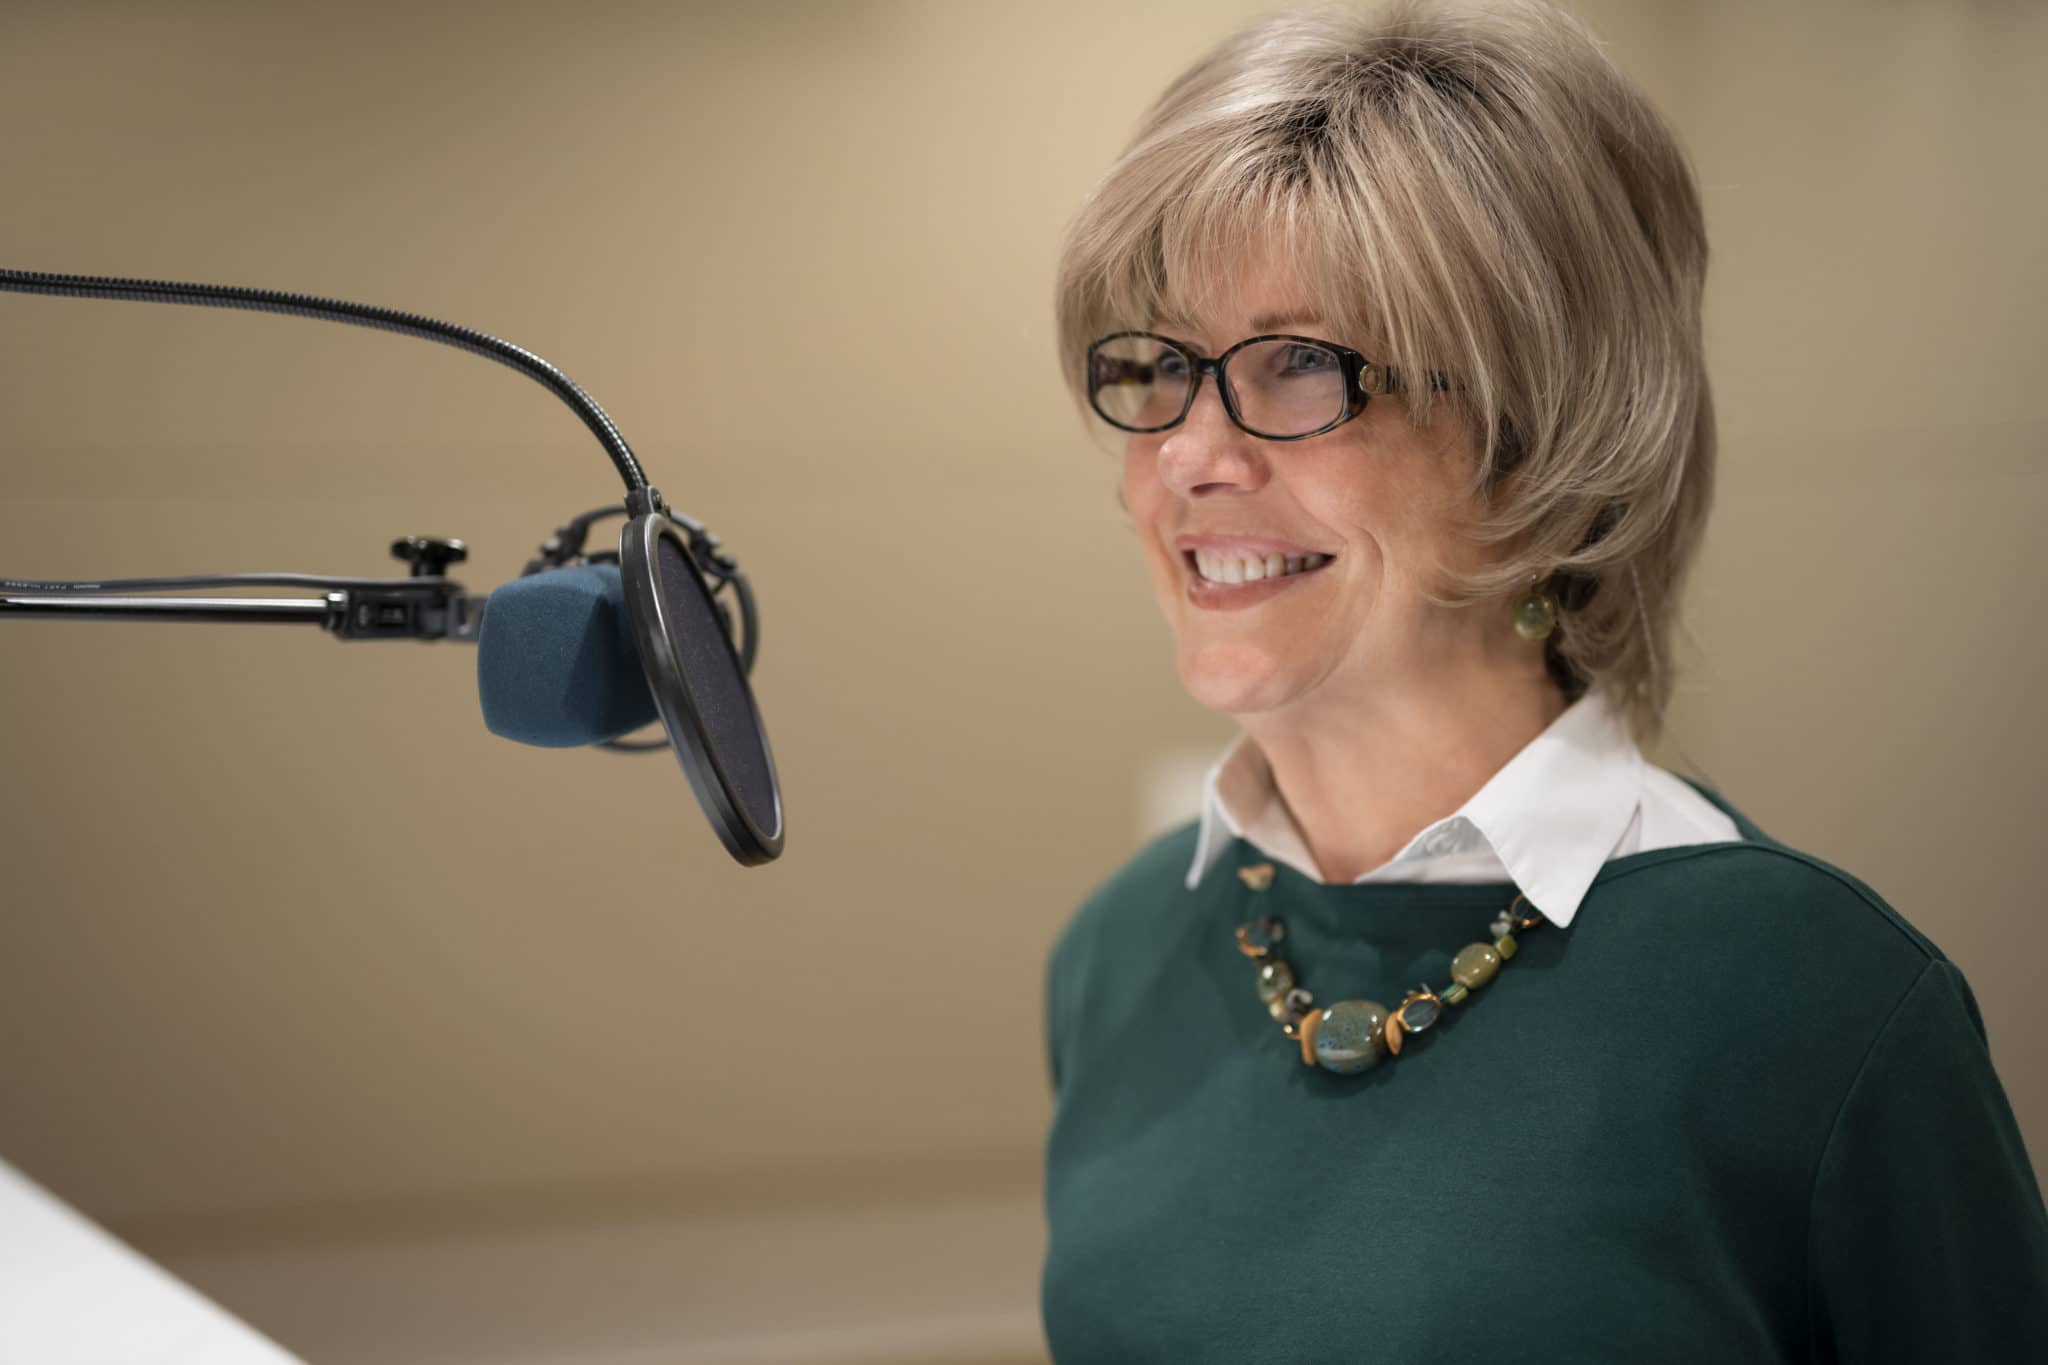 Close up of Joni in her thin-rimmed glasses smiling as she speaks into the radio microphone.